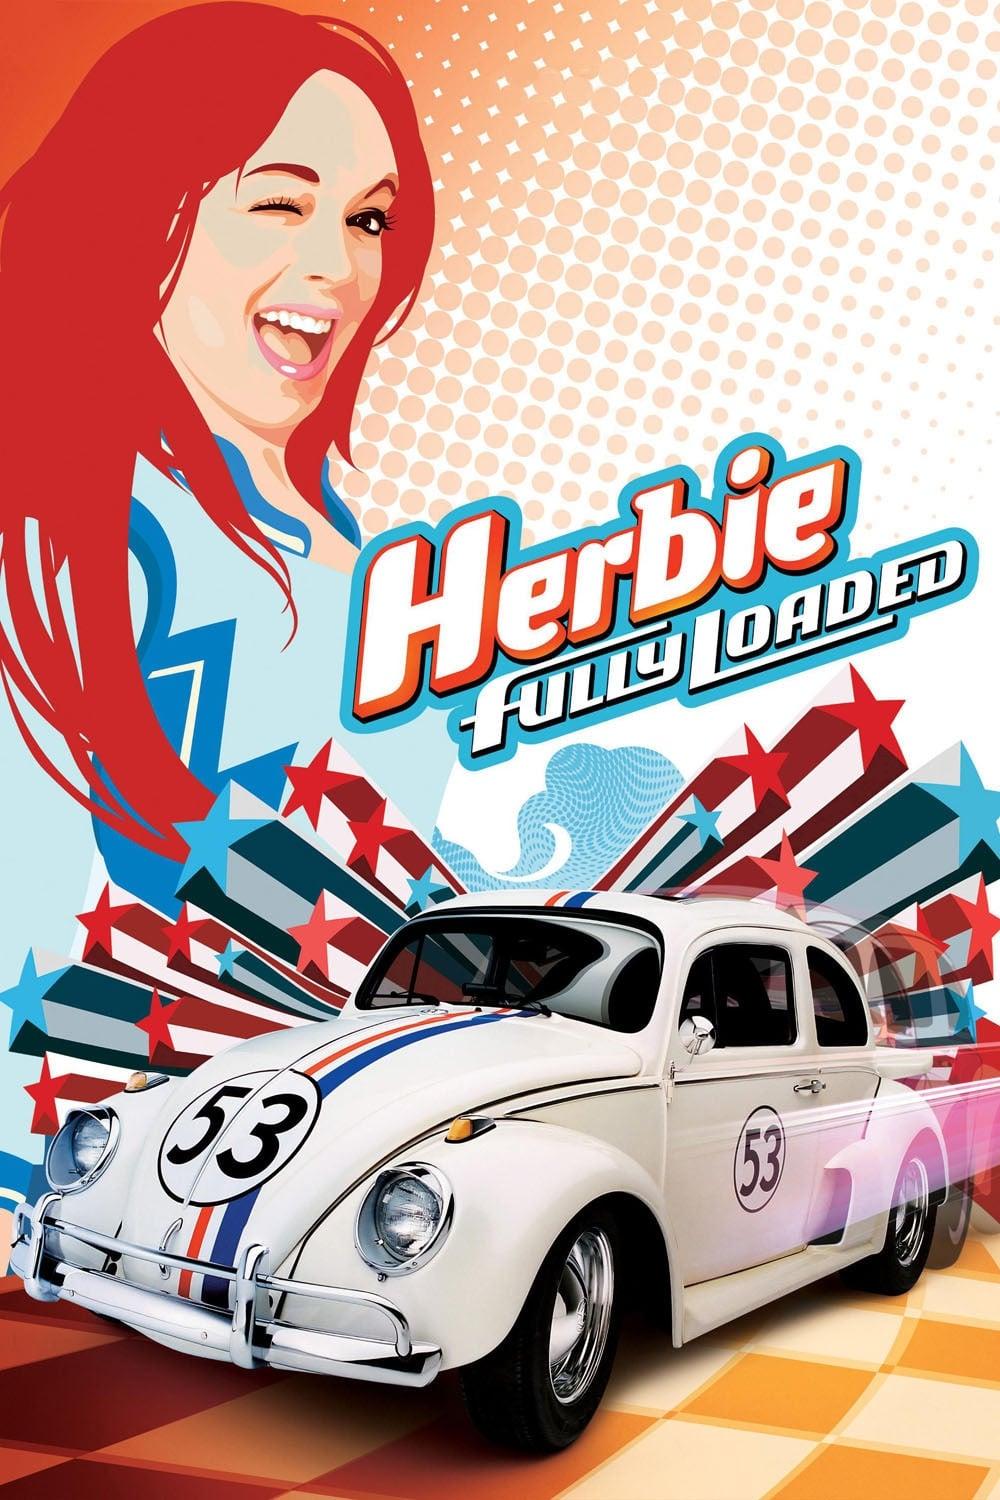 Herbie Fully Loaded poster